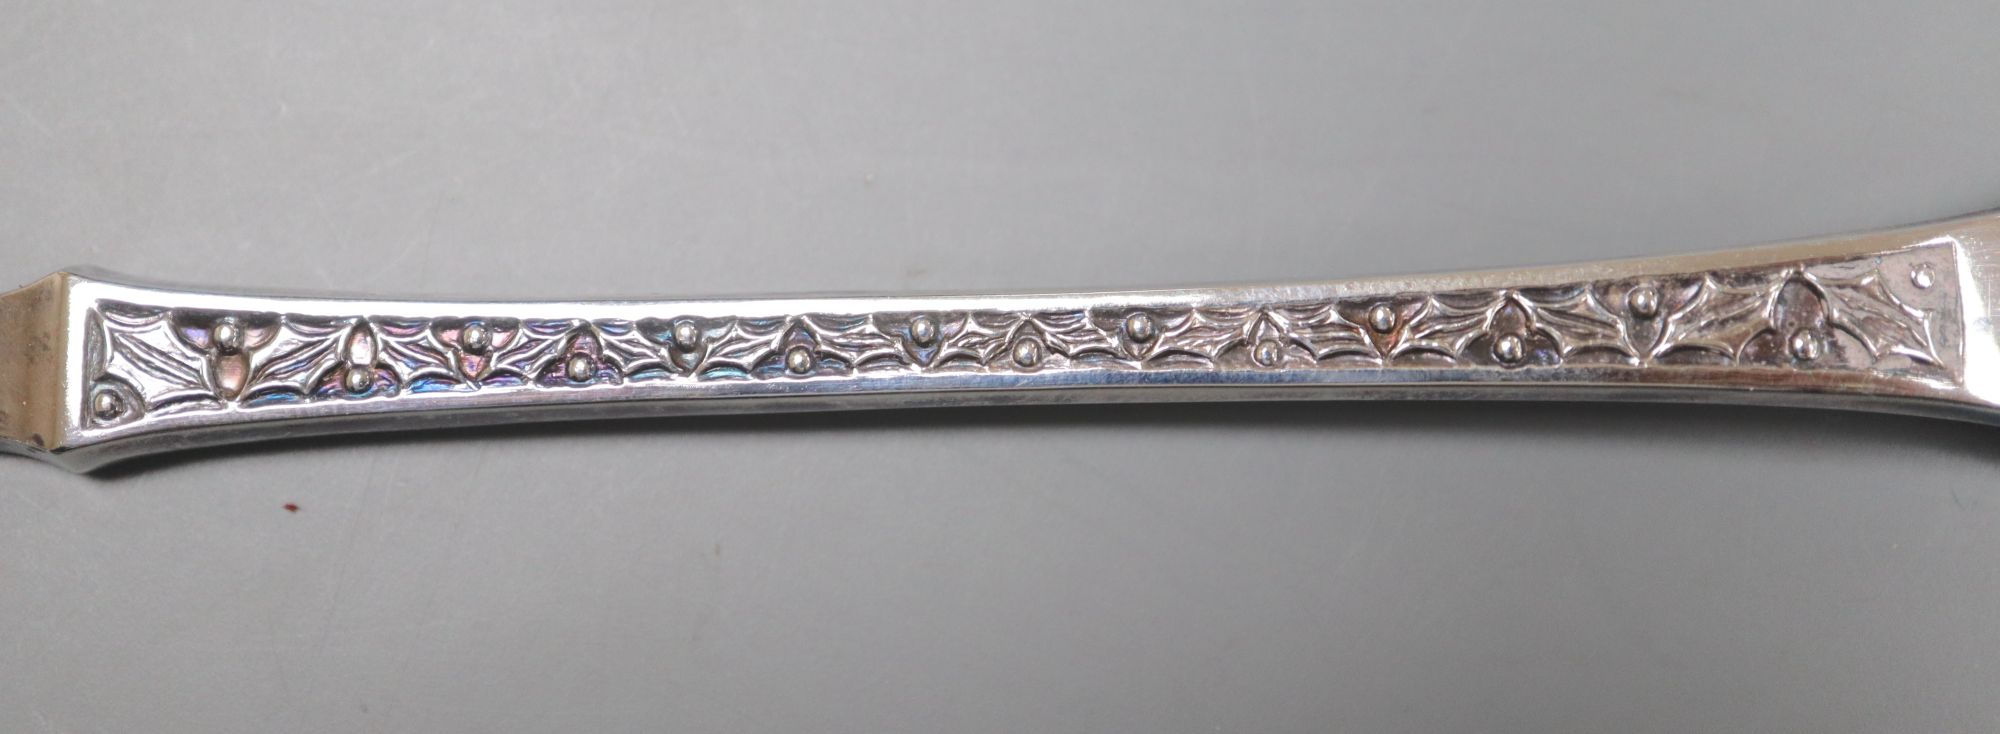 A cased set of six silver teaspoons and two single Christmas spoons